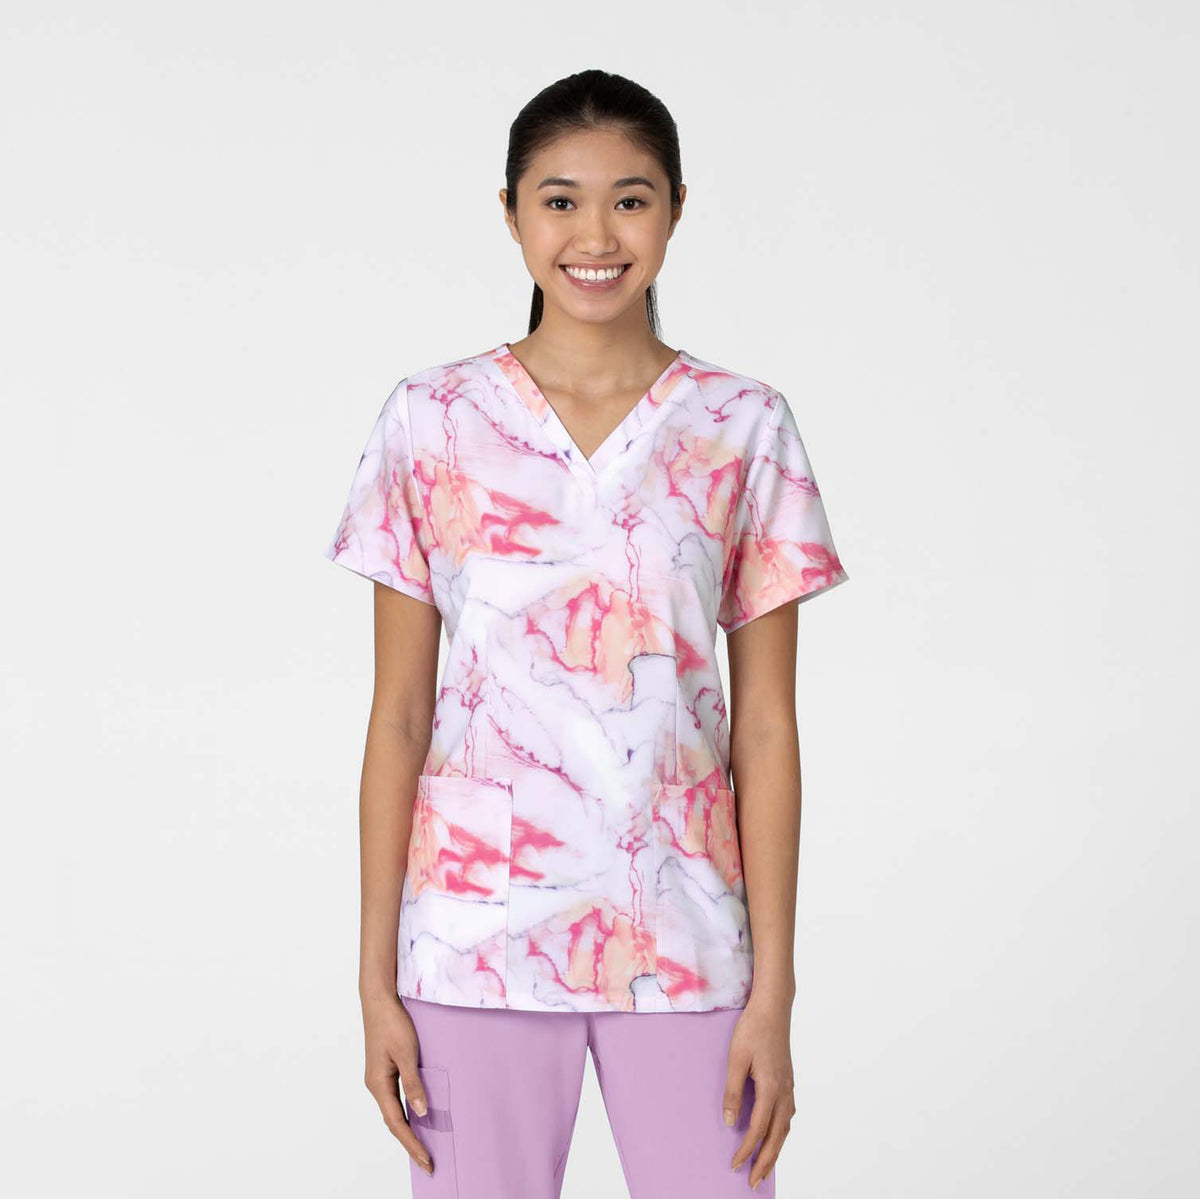 Women's Fitted 3-Pocket V-Neck Print Scrub Top - Ink Drop